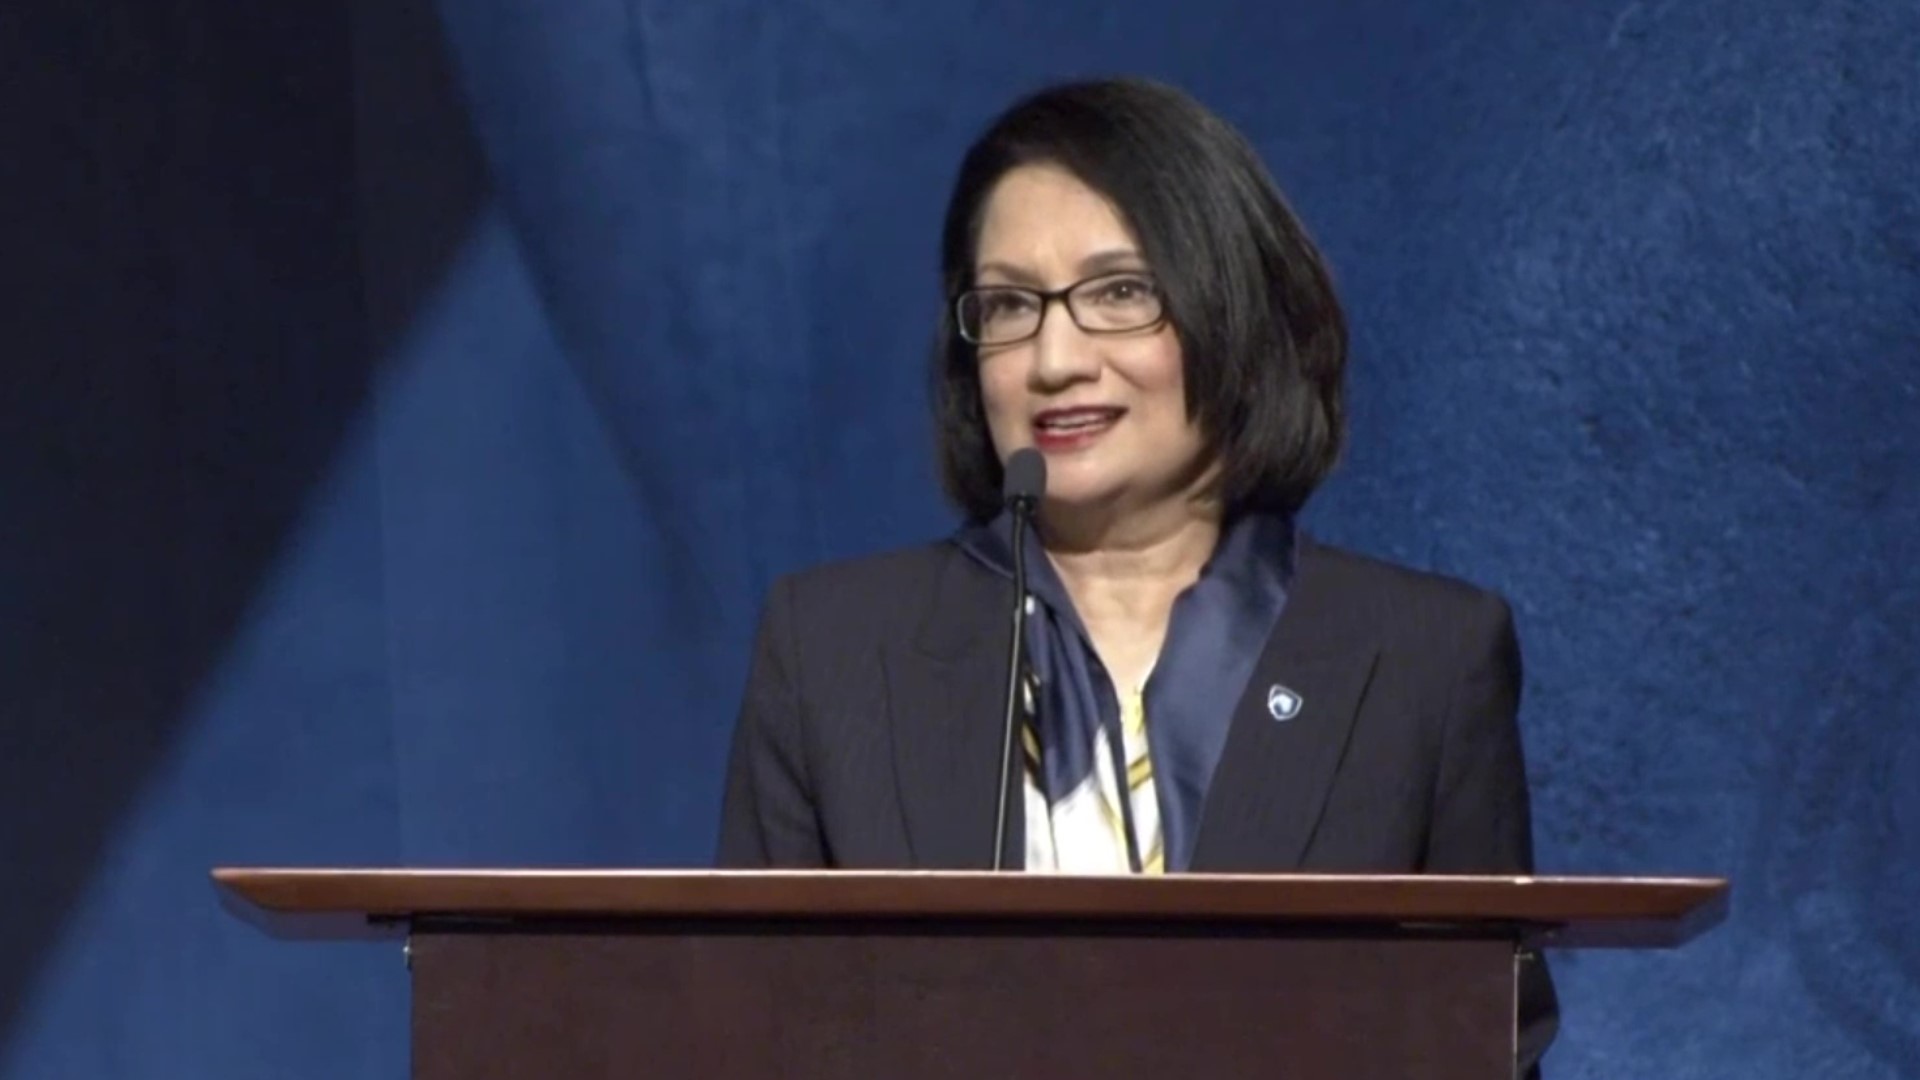 Neeli Bendapudi will be the first woman and person of color to lead Penn State, all its campuses, its hospitals, and its 31,000 full-time employees.